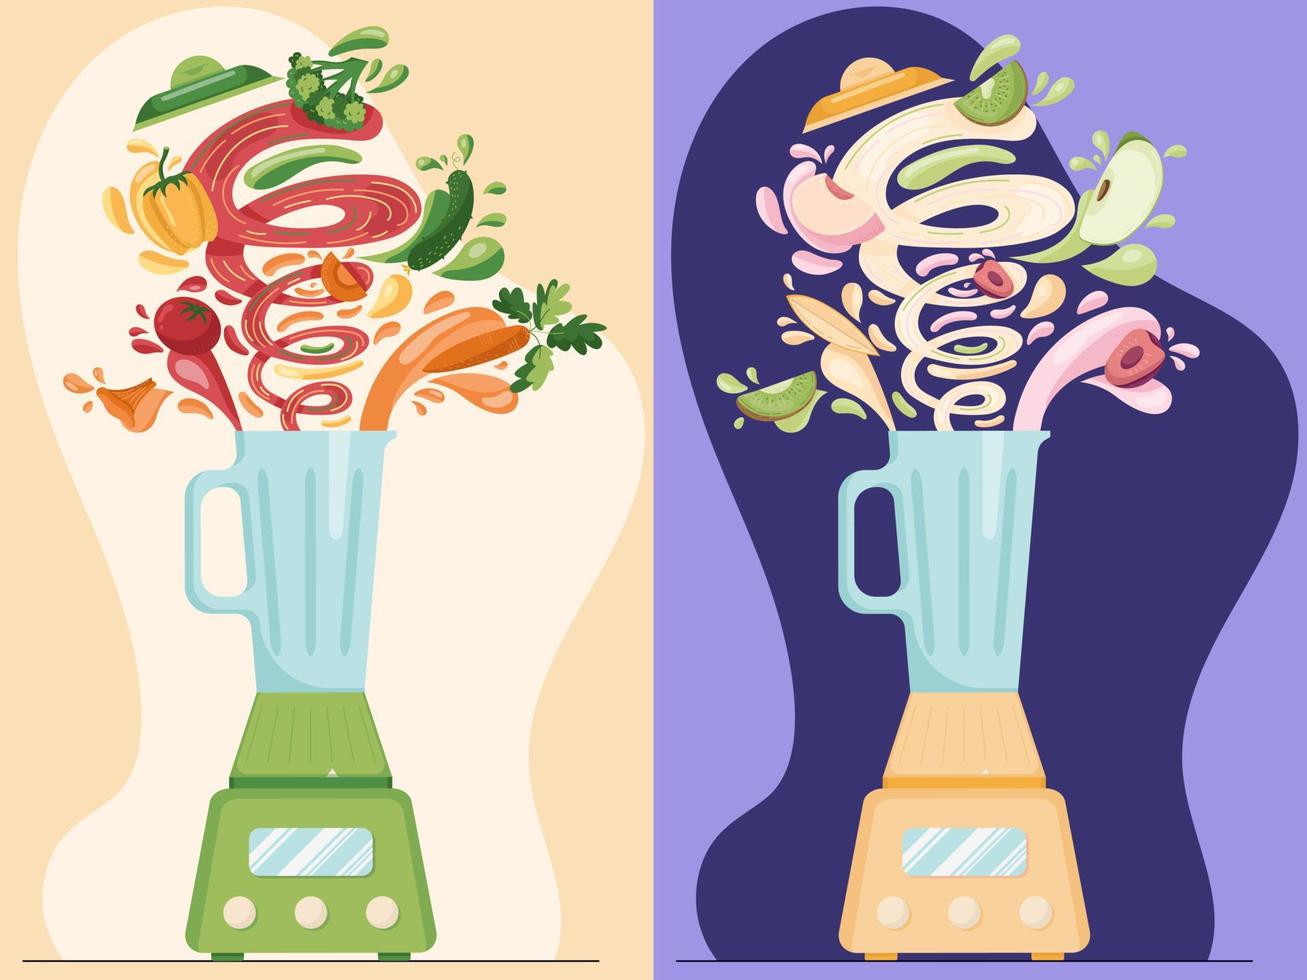 Making vegetables and fruits fresh smoothie in electric blender, preparation healthy organic food in a flat cartoon style. Vector illustration